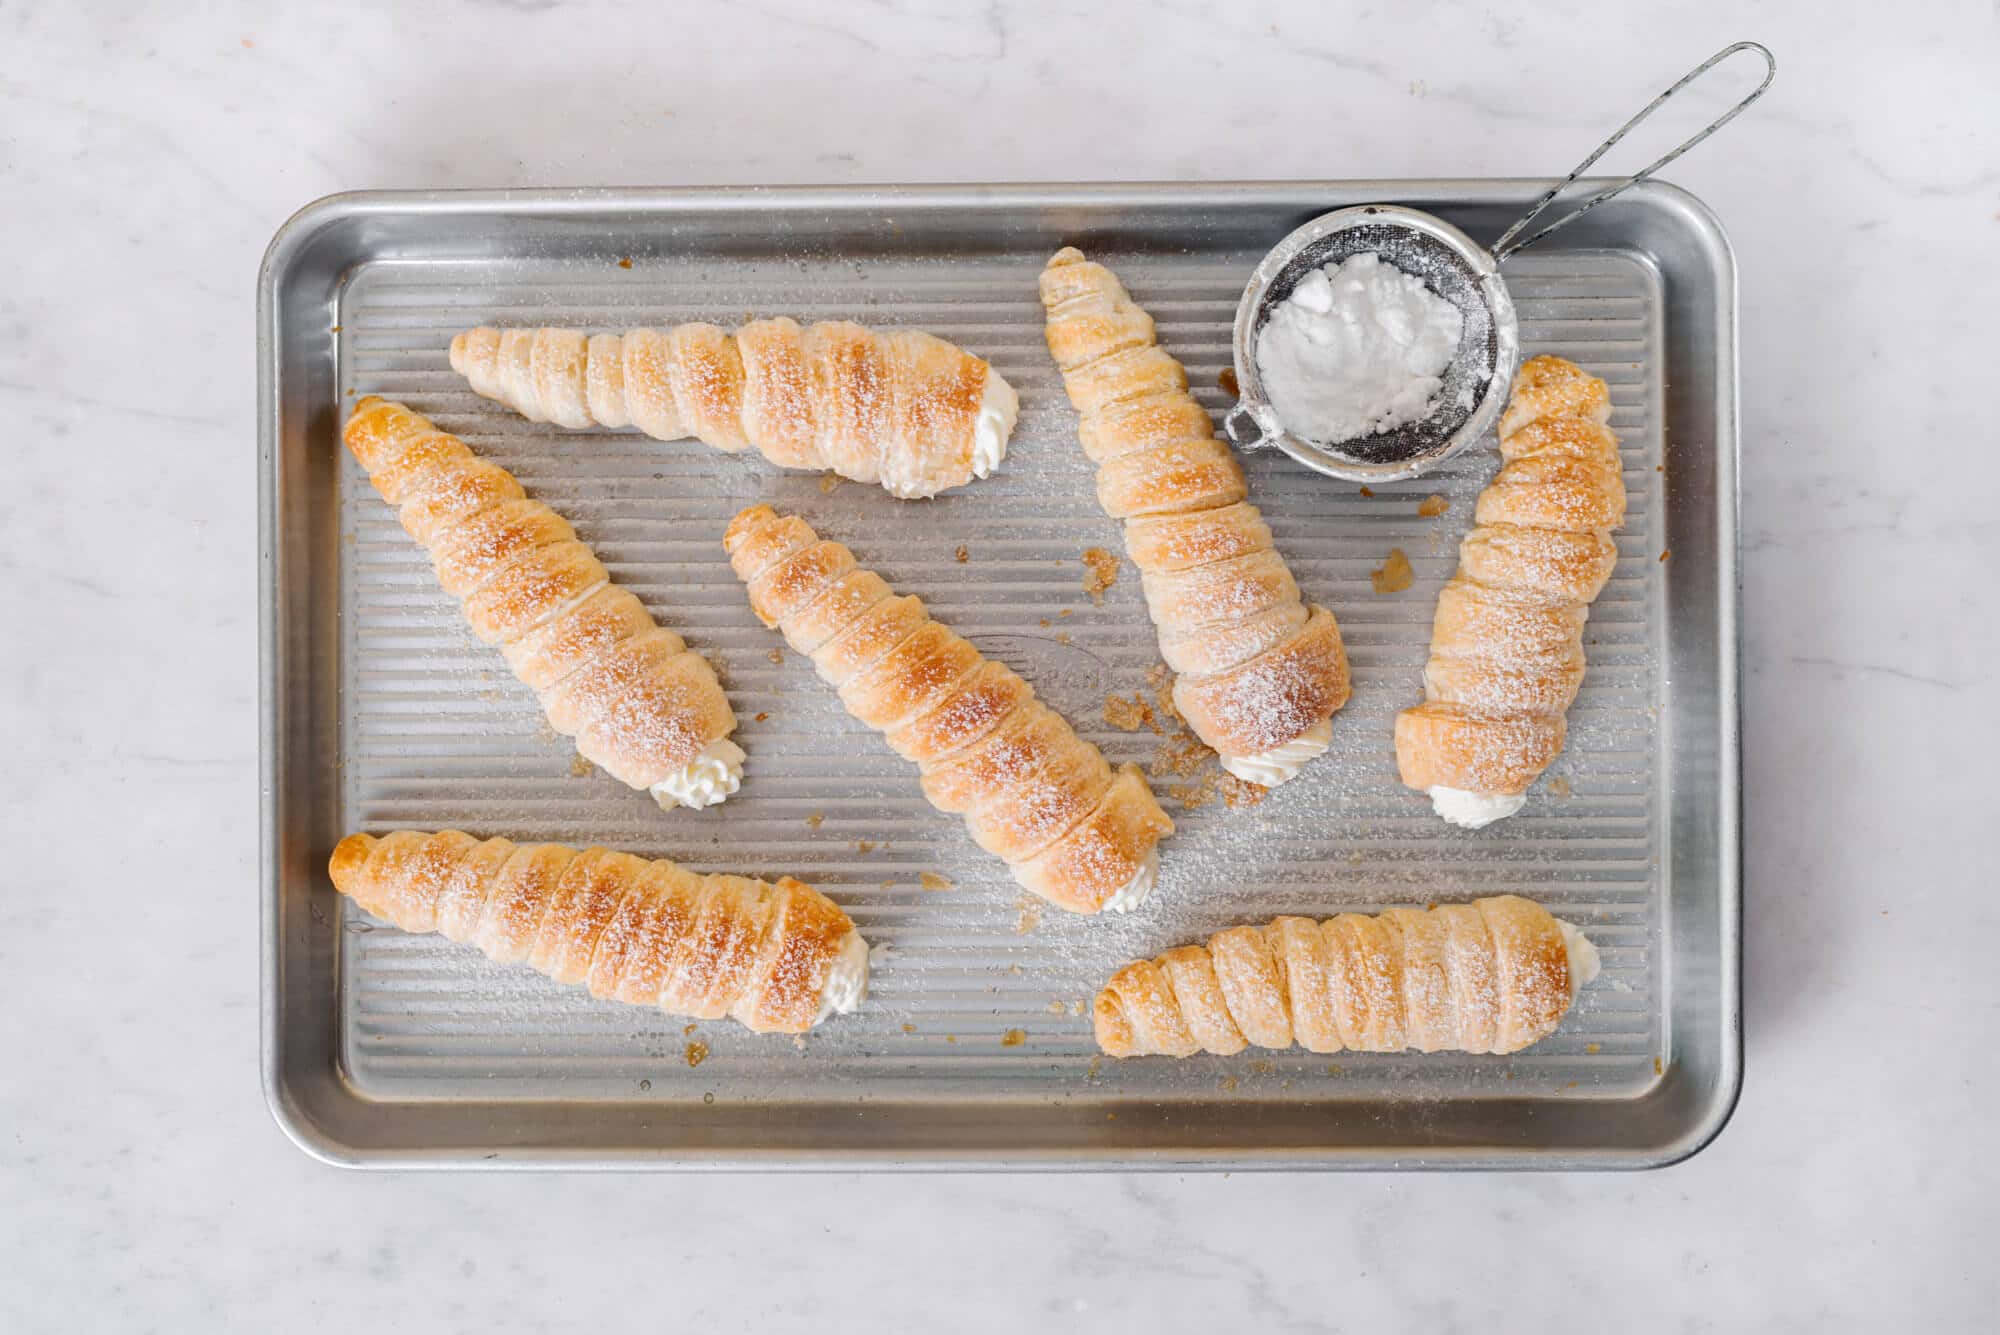 A baking tray with cream horns dusted with powdered sugar.